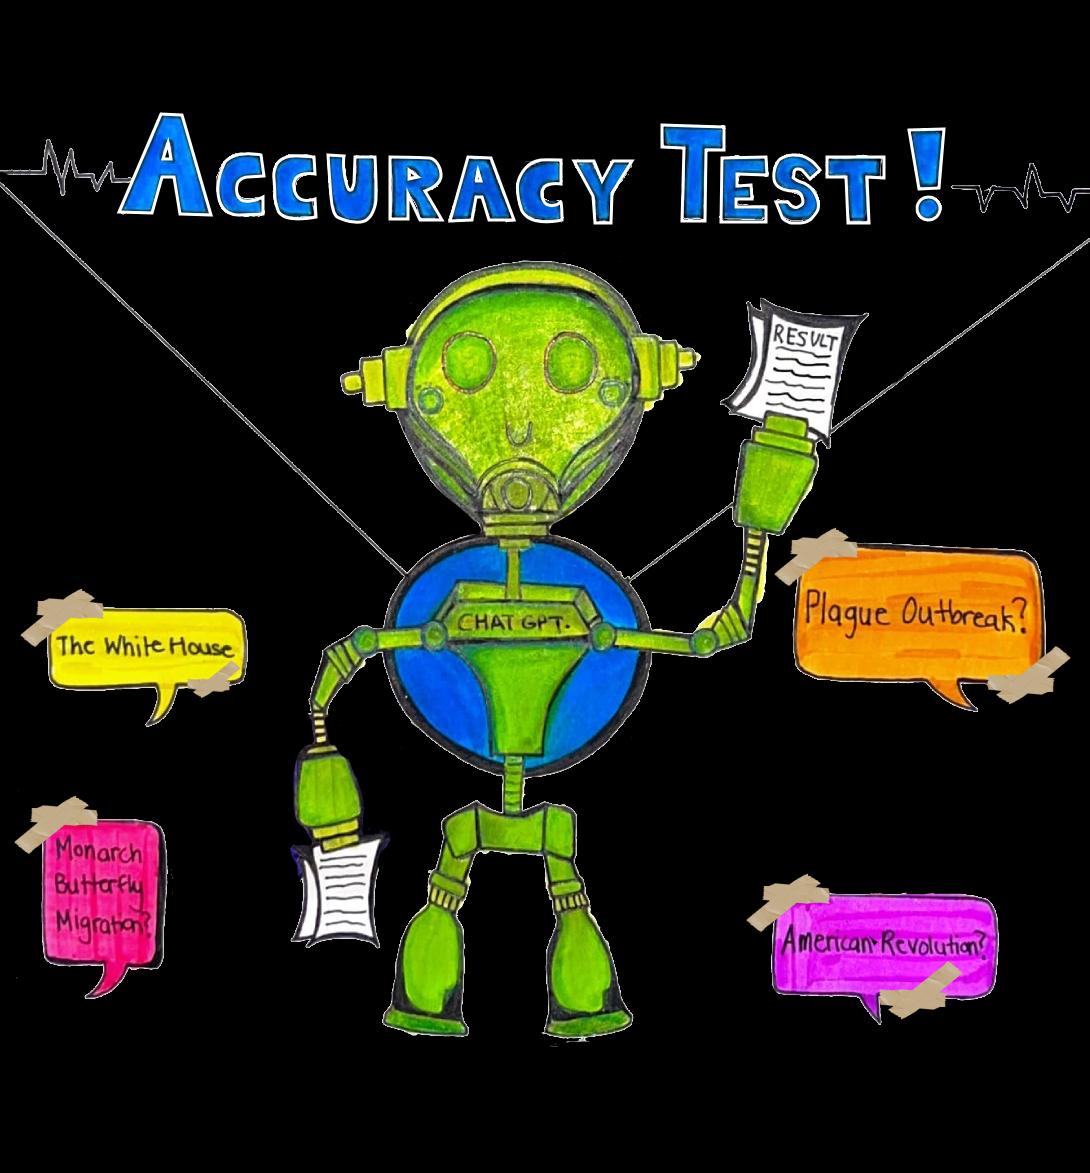 An image of a hand-drawn robot appears beneath the words "Accuracy Test." The robot is holding papers, as speech bubbles behind it say "Plague Outbreak?" "White House" "Monarch butterfly migration" and "American Revolution" 